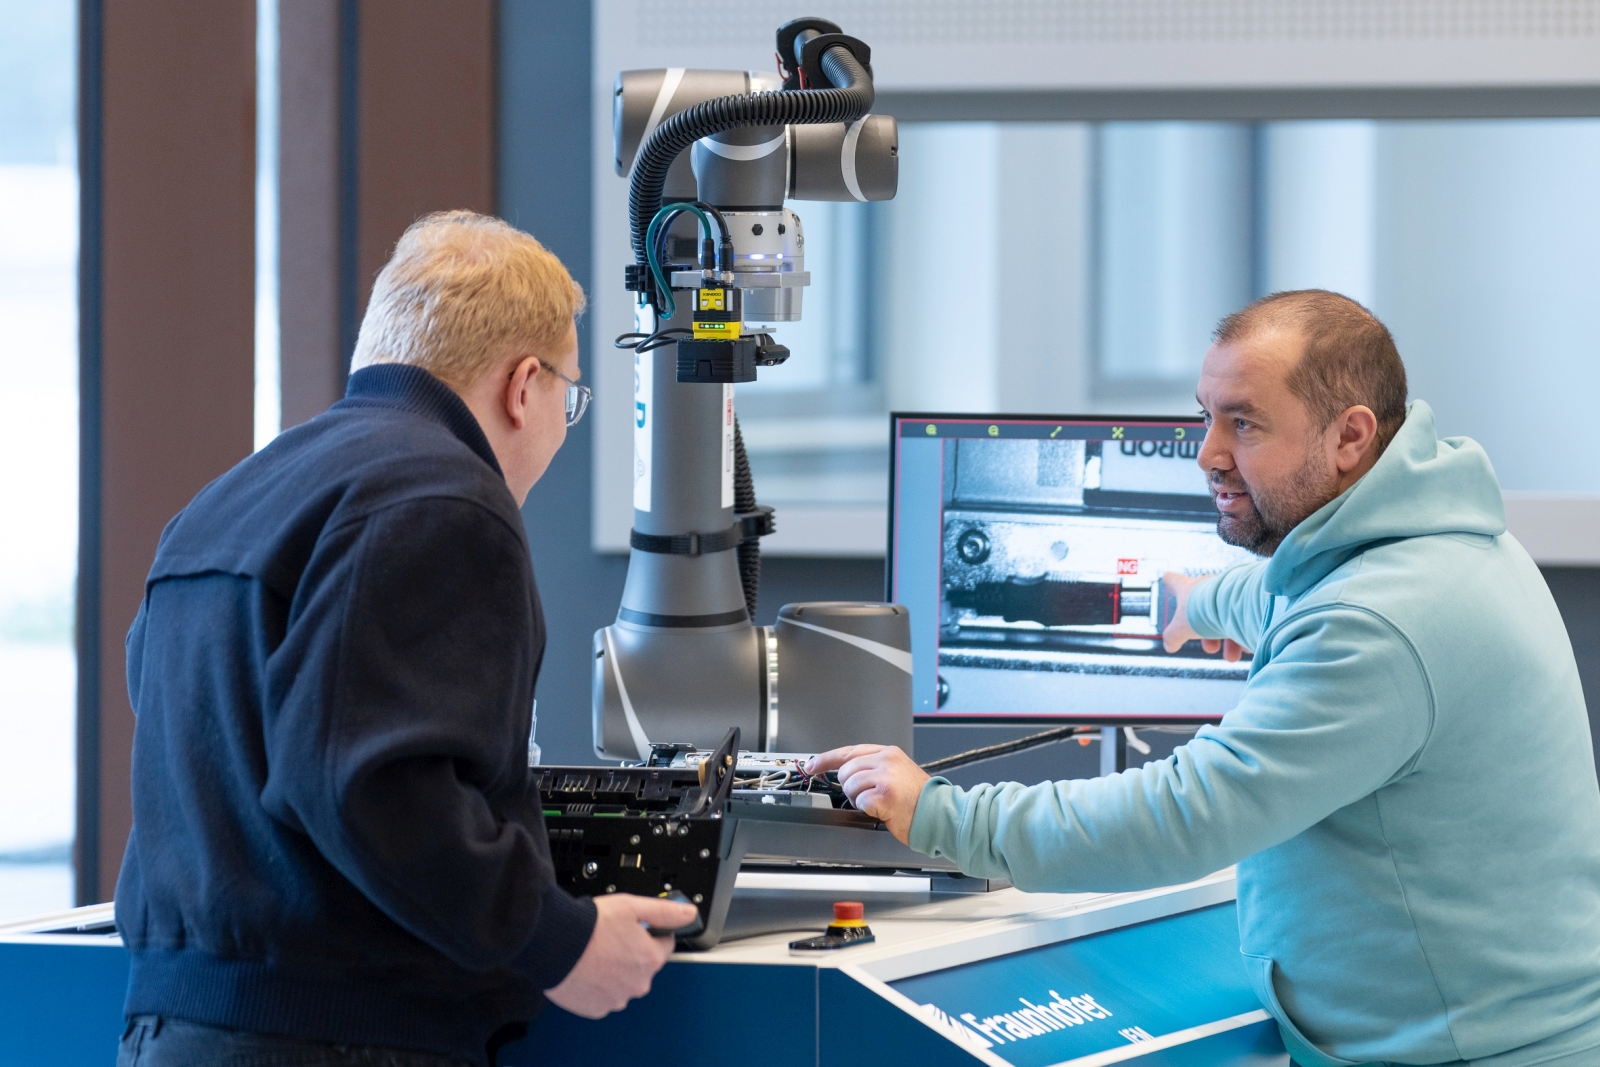 The cobot system is designed to help small and medium-sized businesses with production